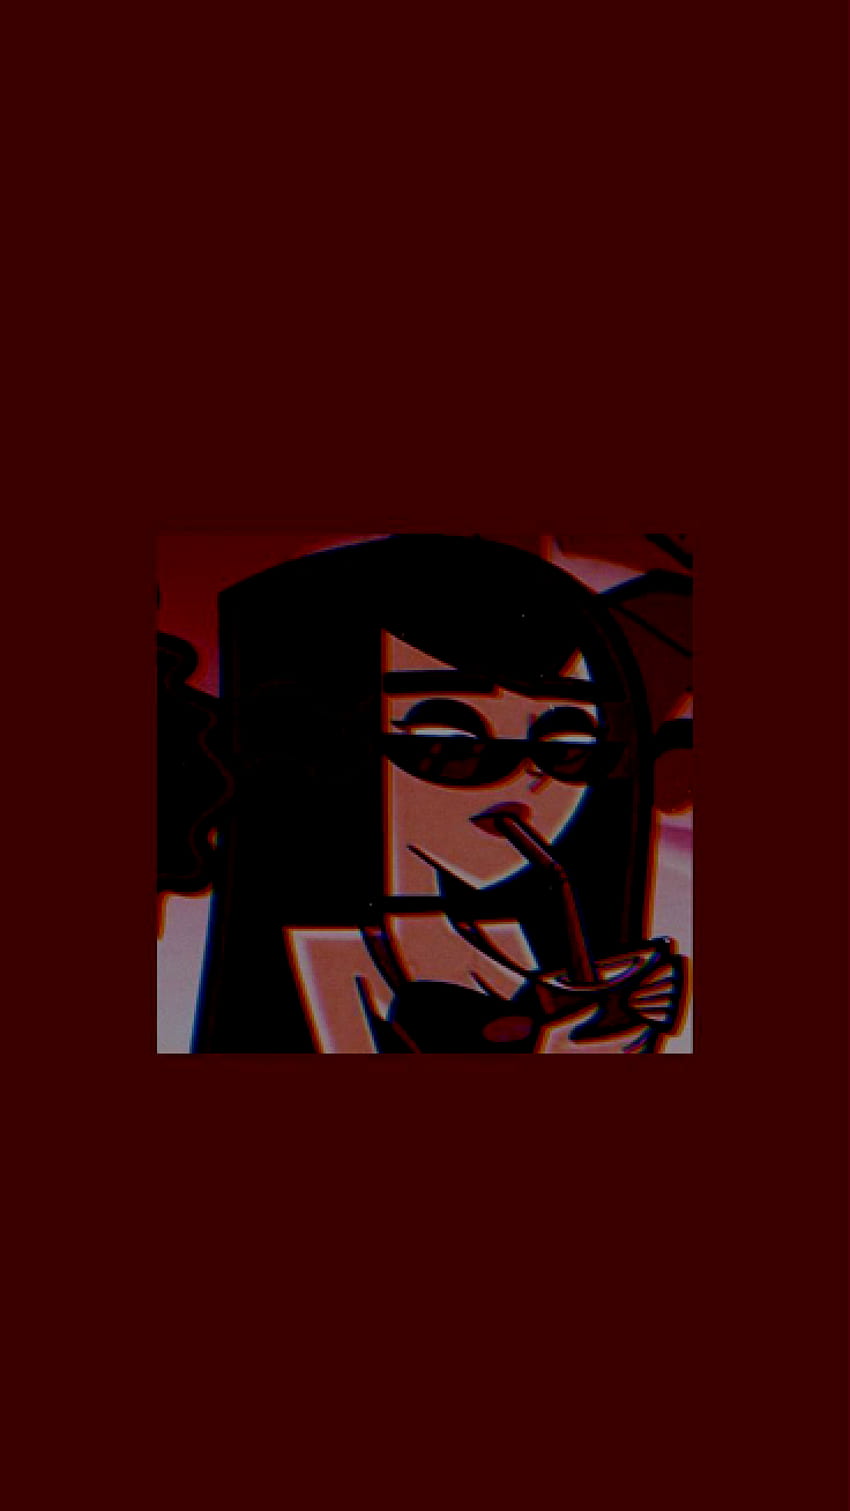 A cartoon character with glasses and black hair - Profile picture